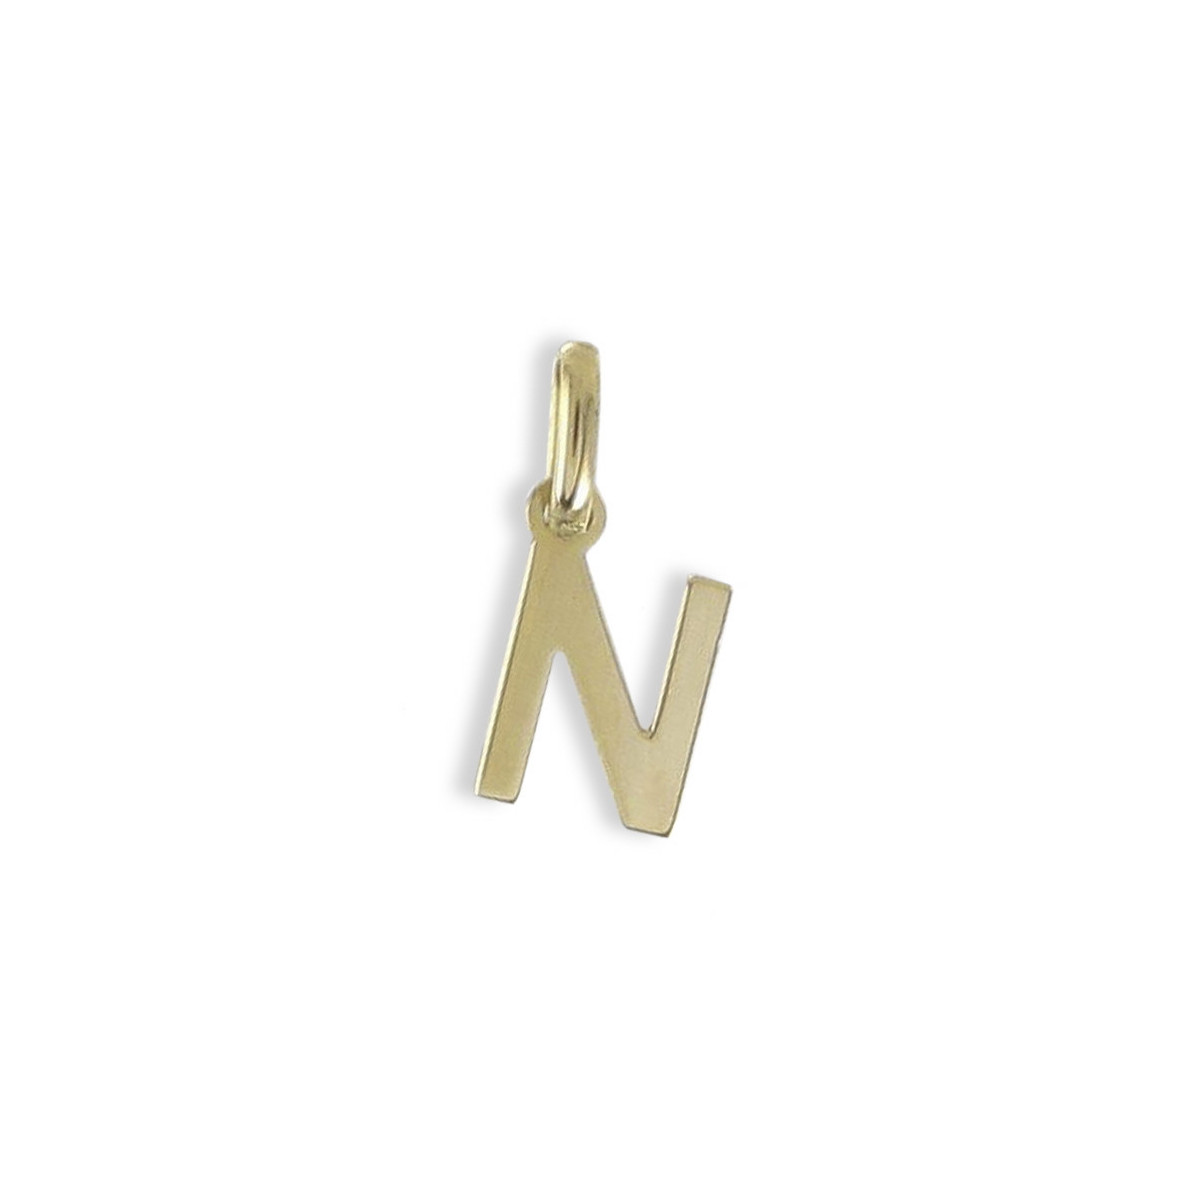 YELLOW GOLD LETTER N PENDANT